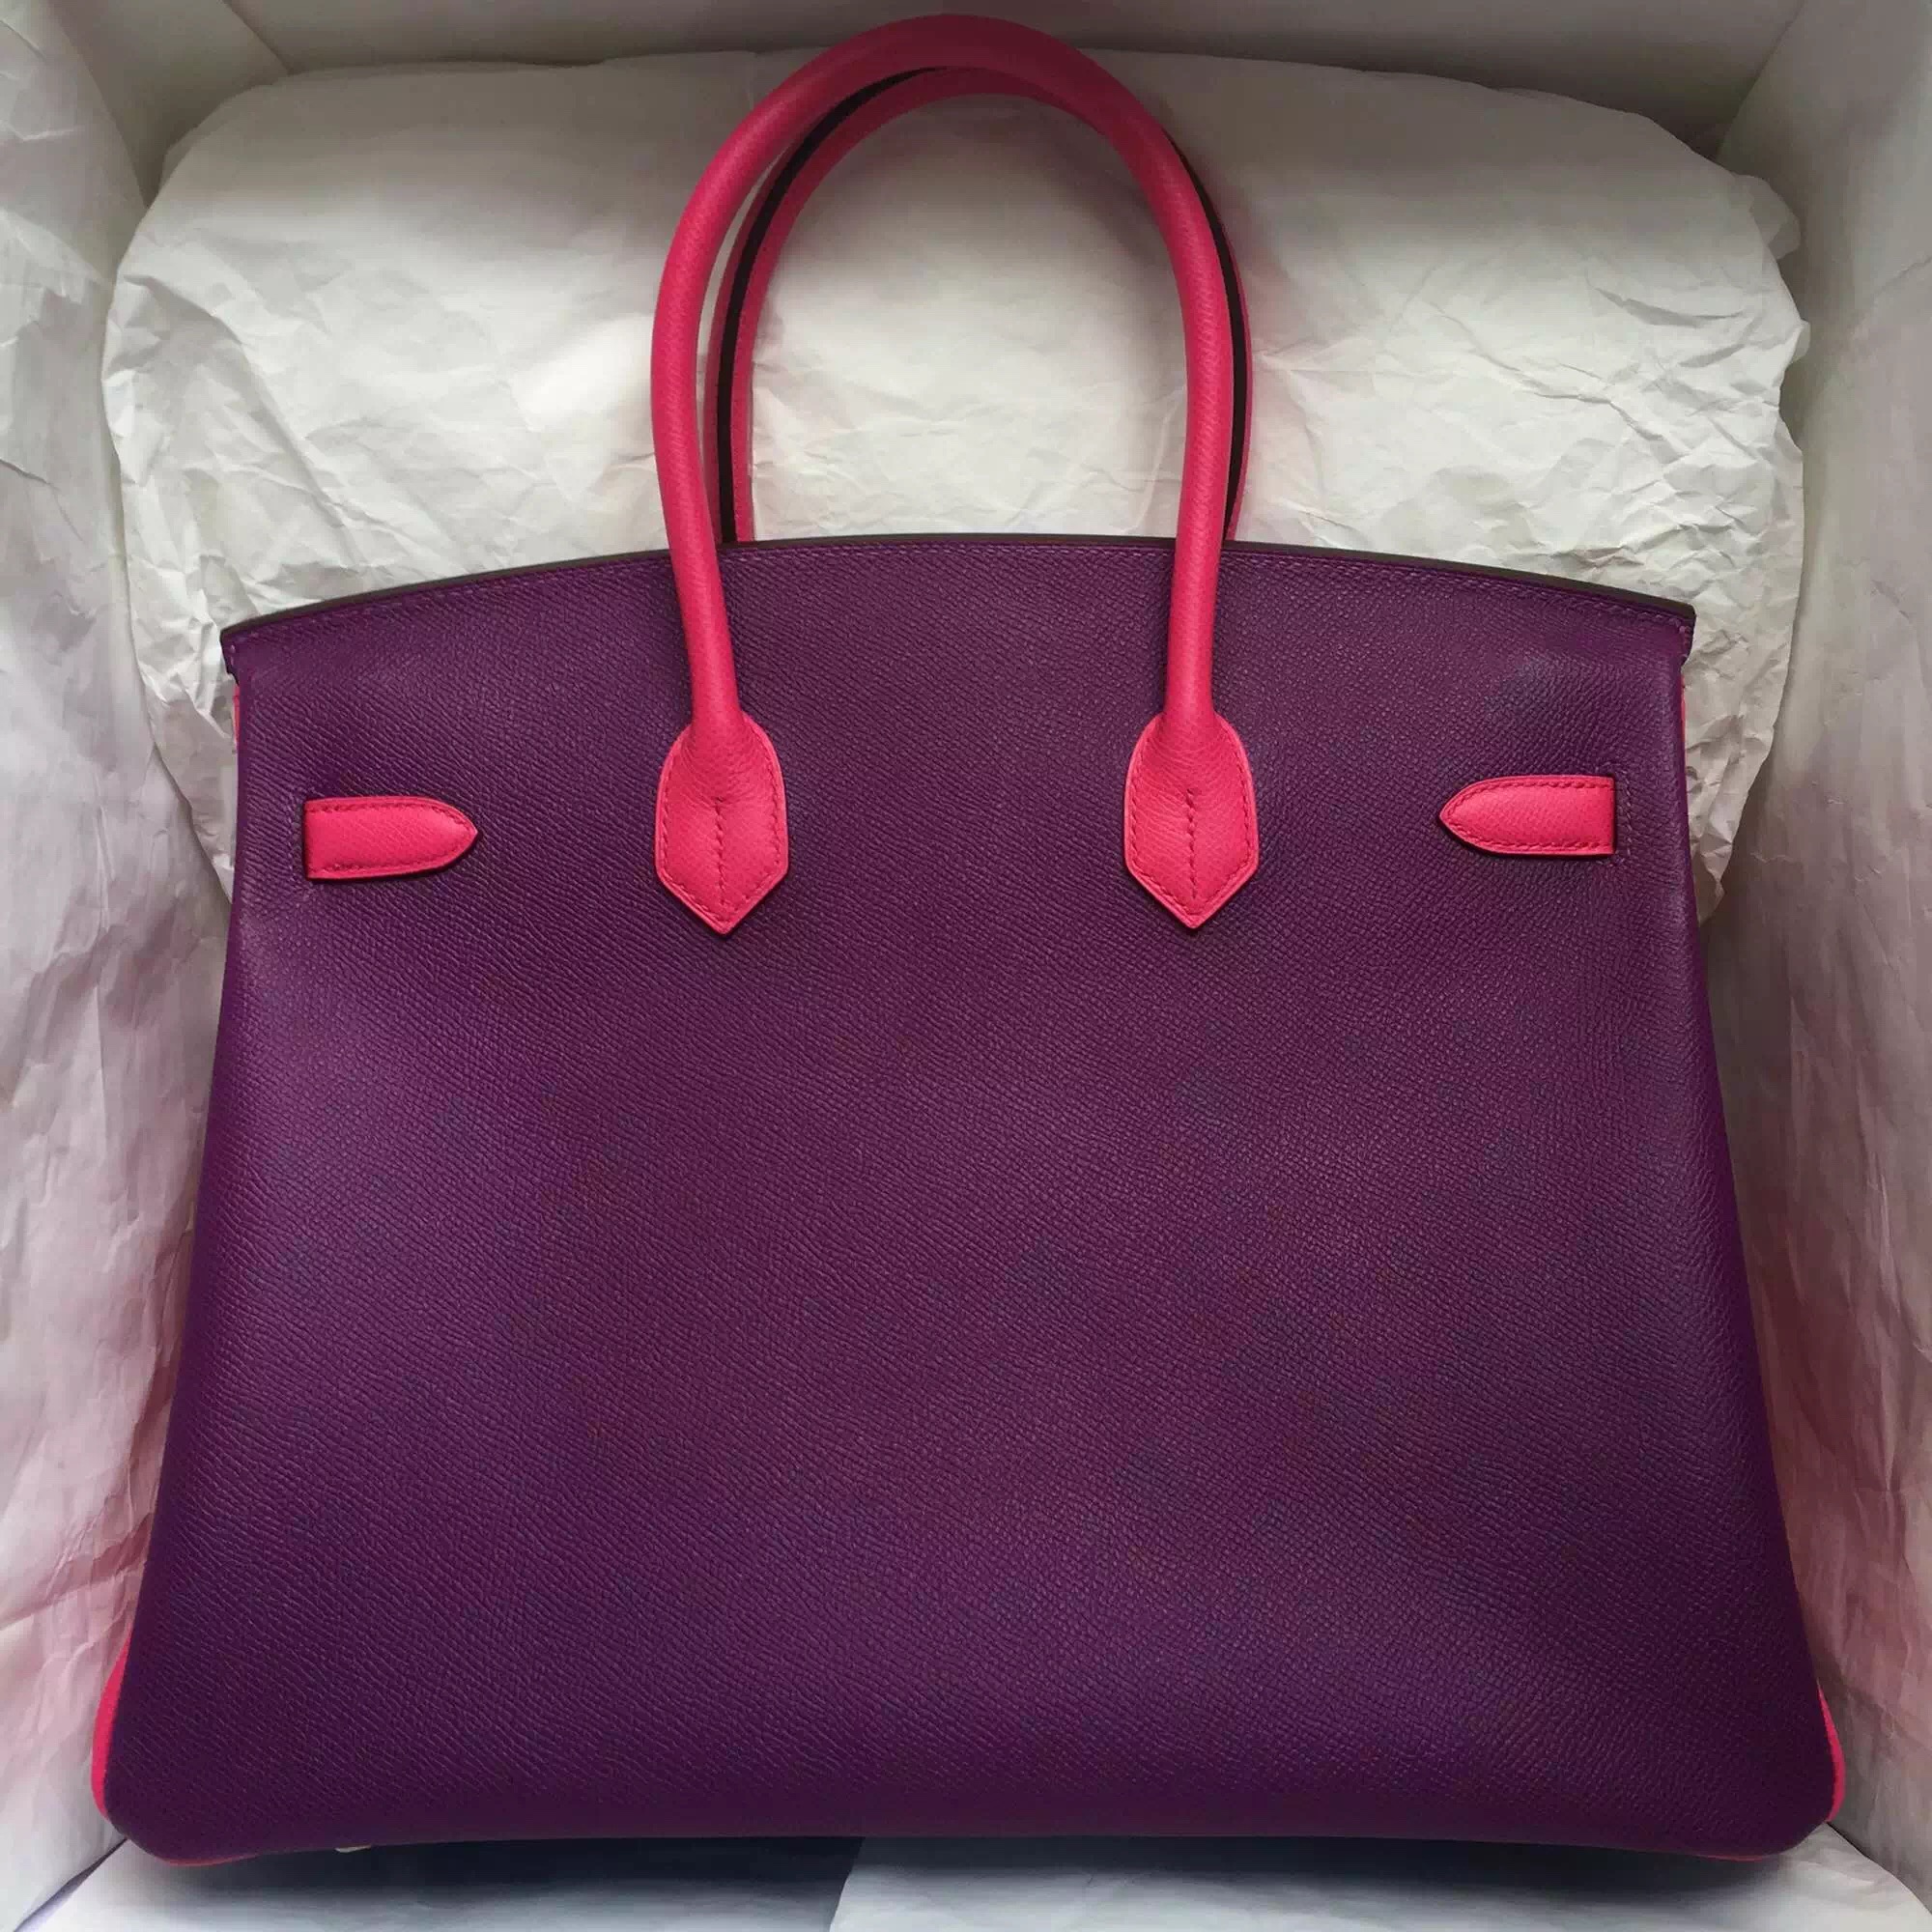 Hermes Birkin35cm 2T Blue Paradise/P9 Anemone/E5 Candy Pink Epsom Leather Tote Bag